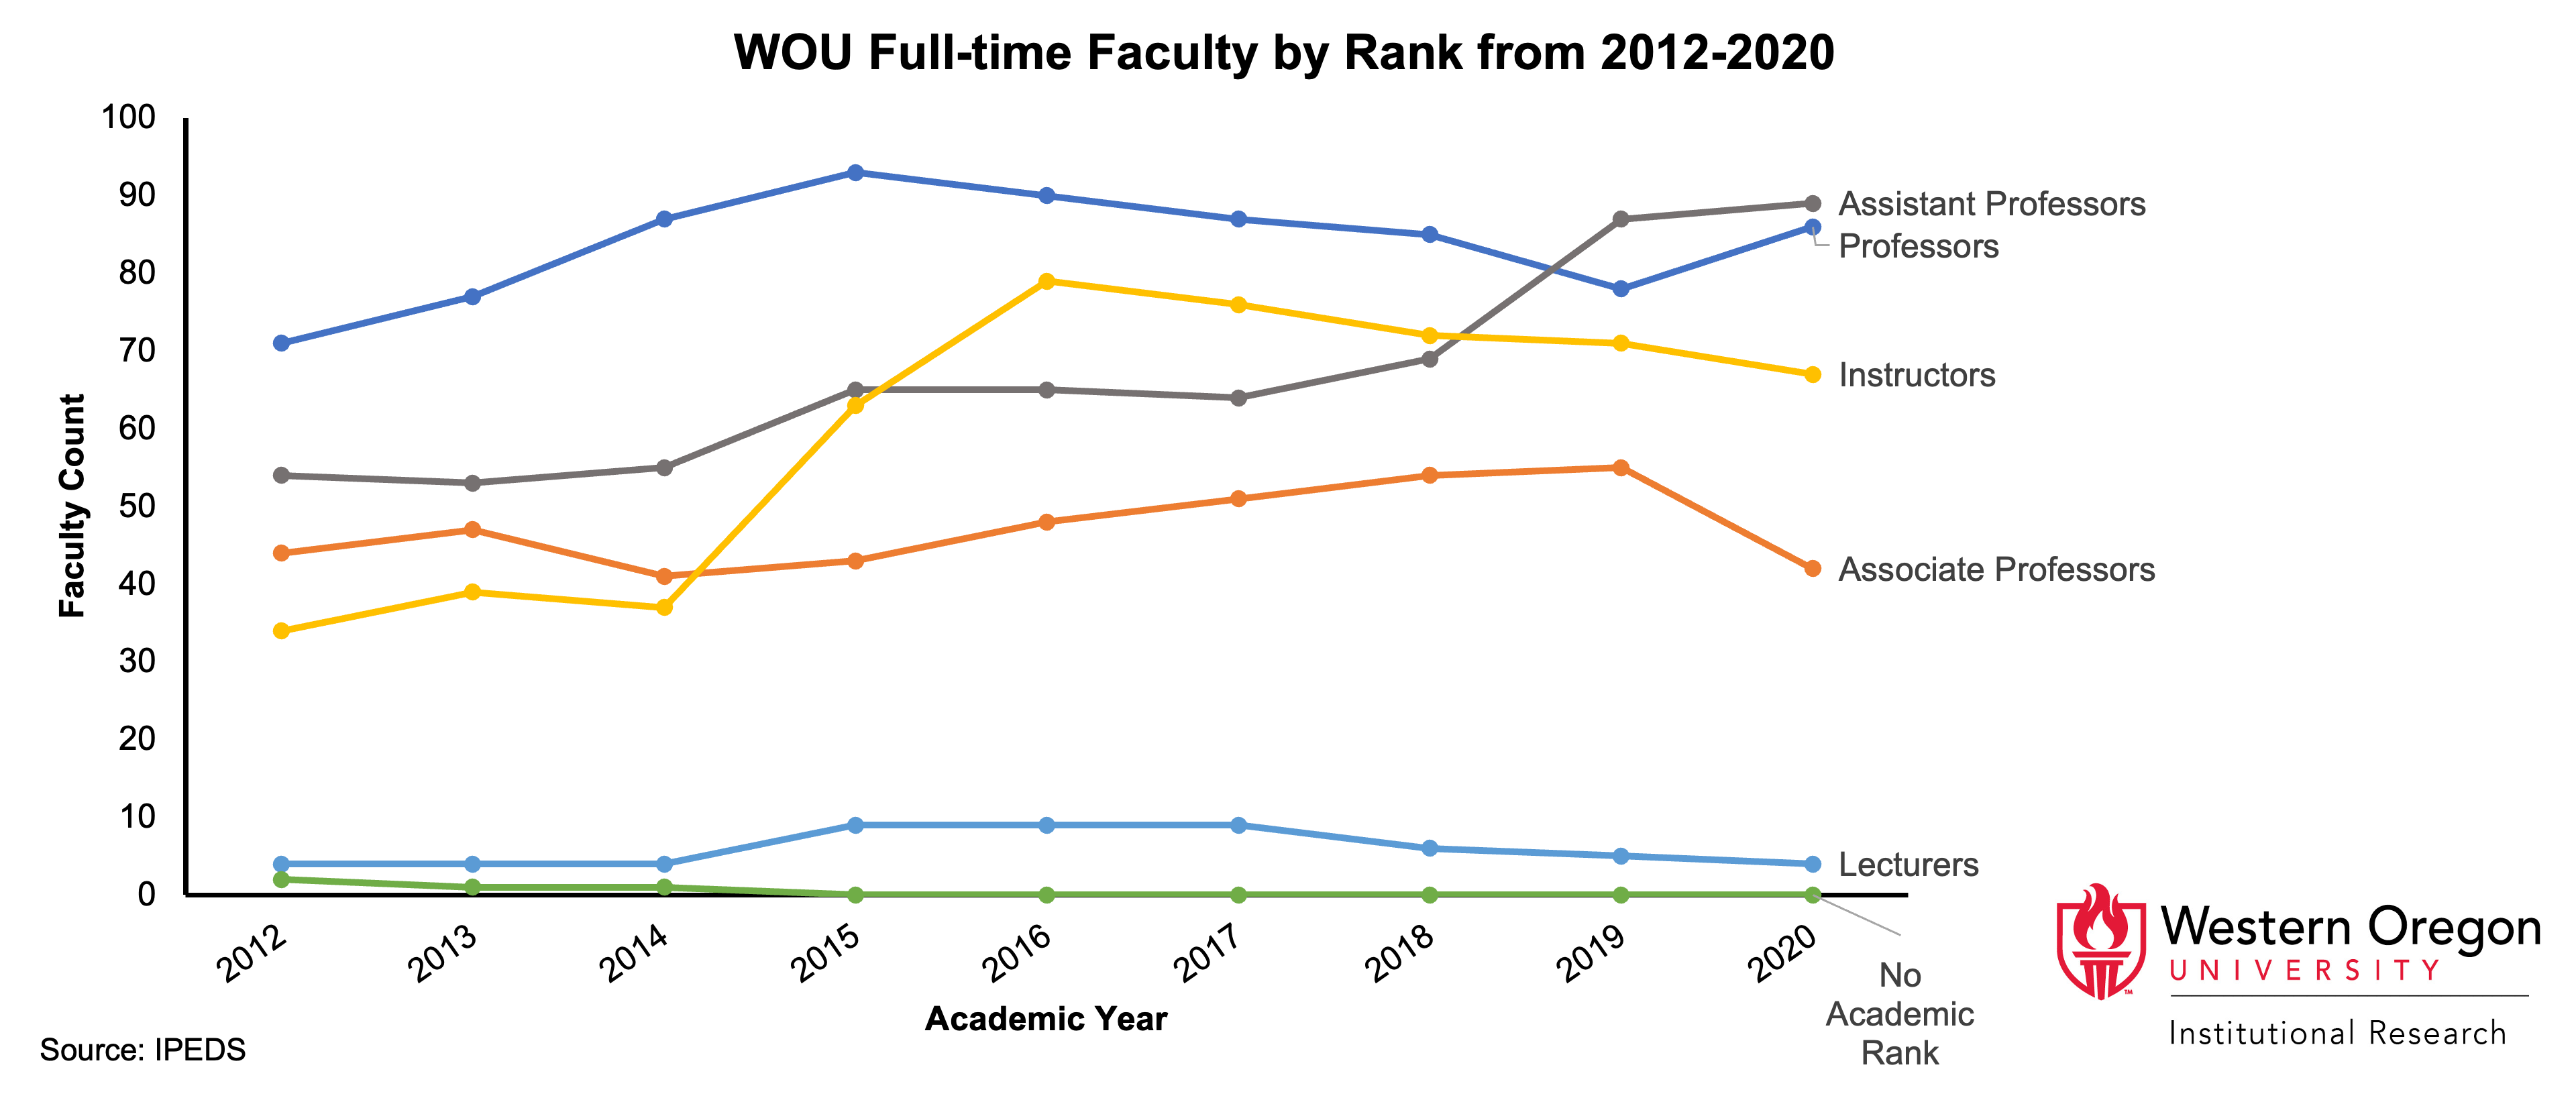 Line graph of counts for faculty at WOU since 2012, broken out by faculty rank, showing that the number of instructors and assistant professors began increasing in 2015 and 2019